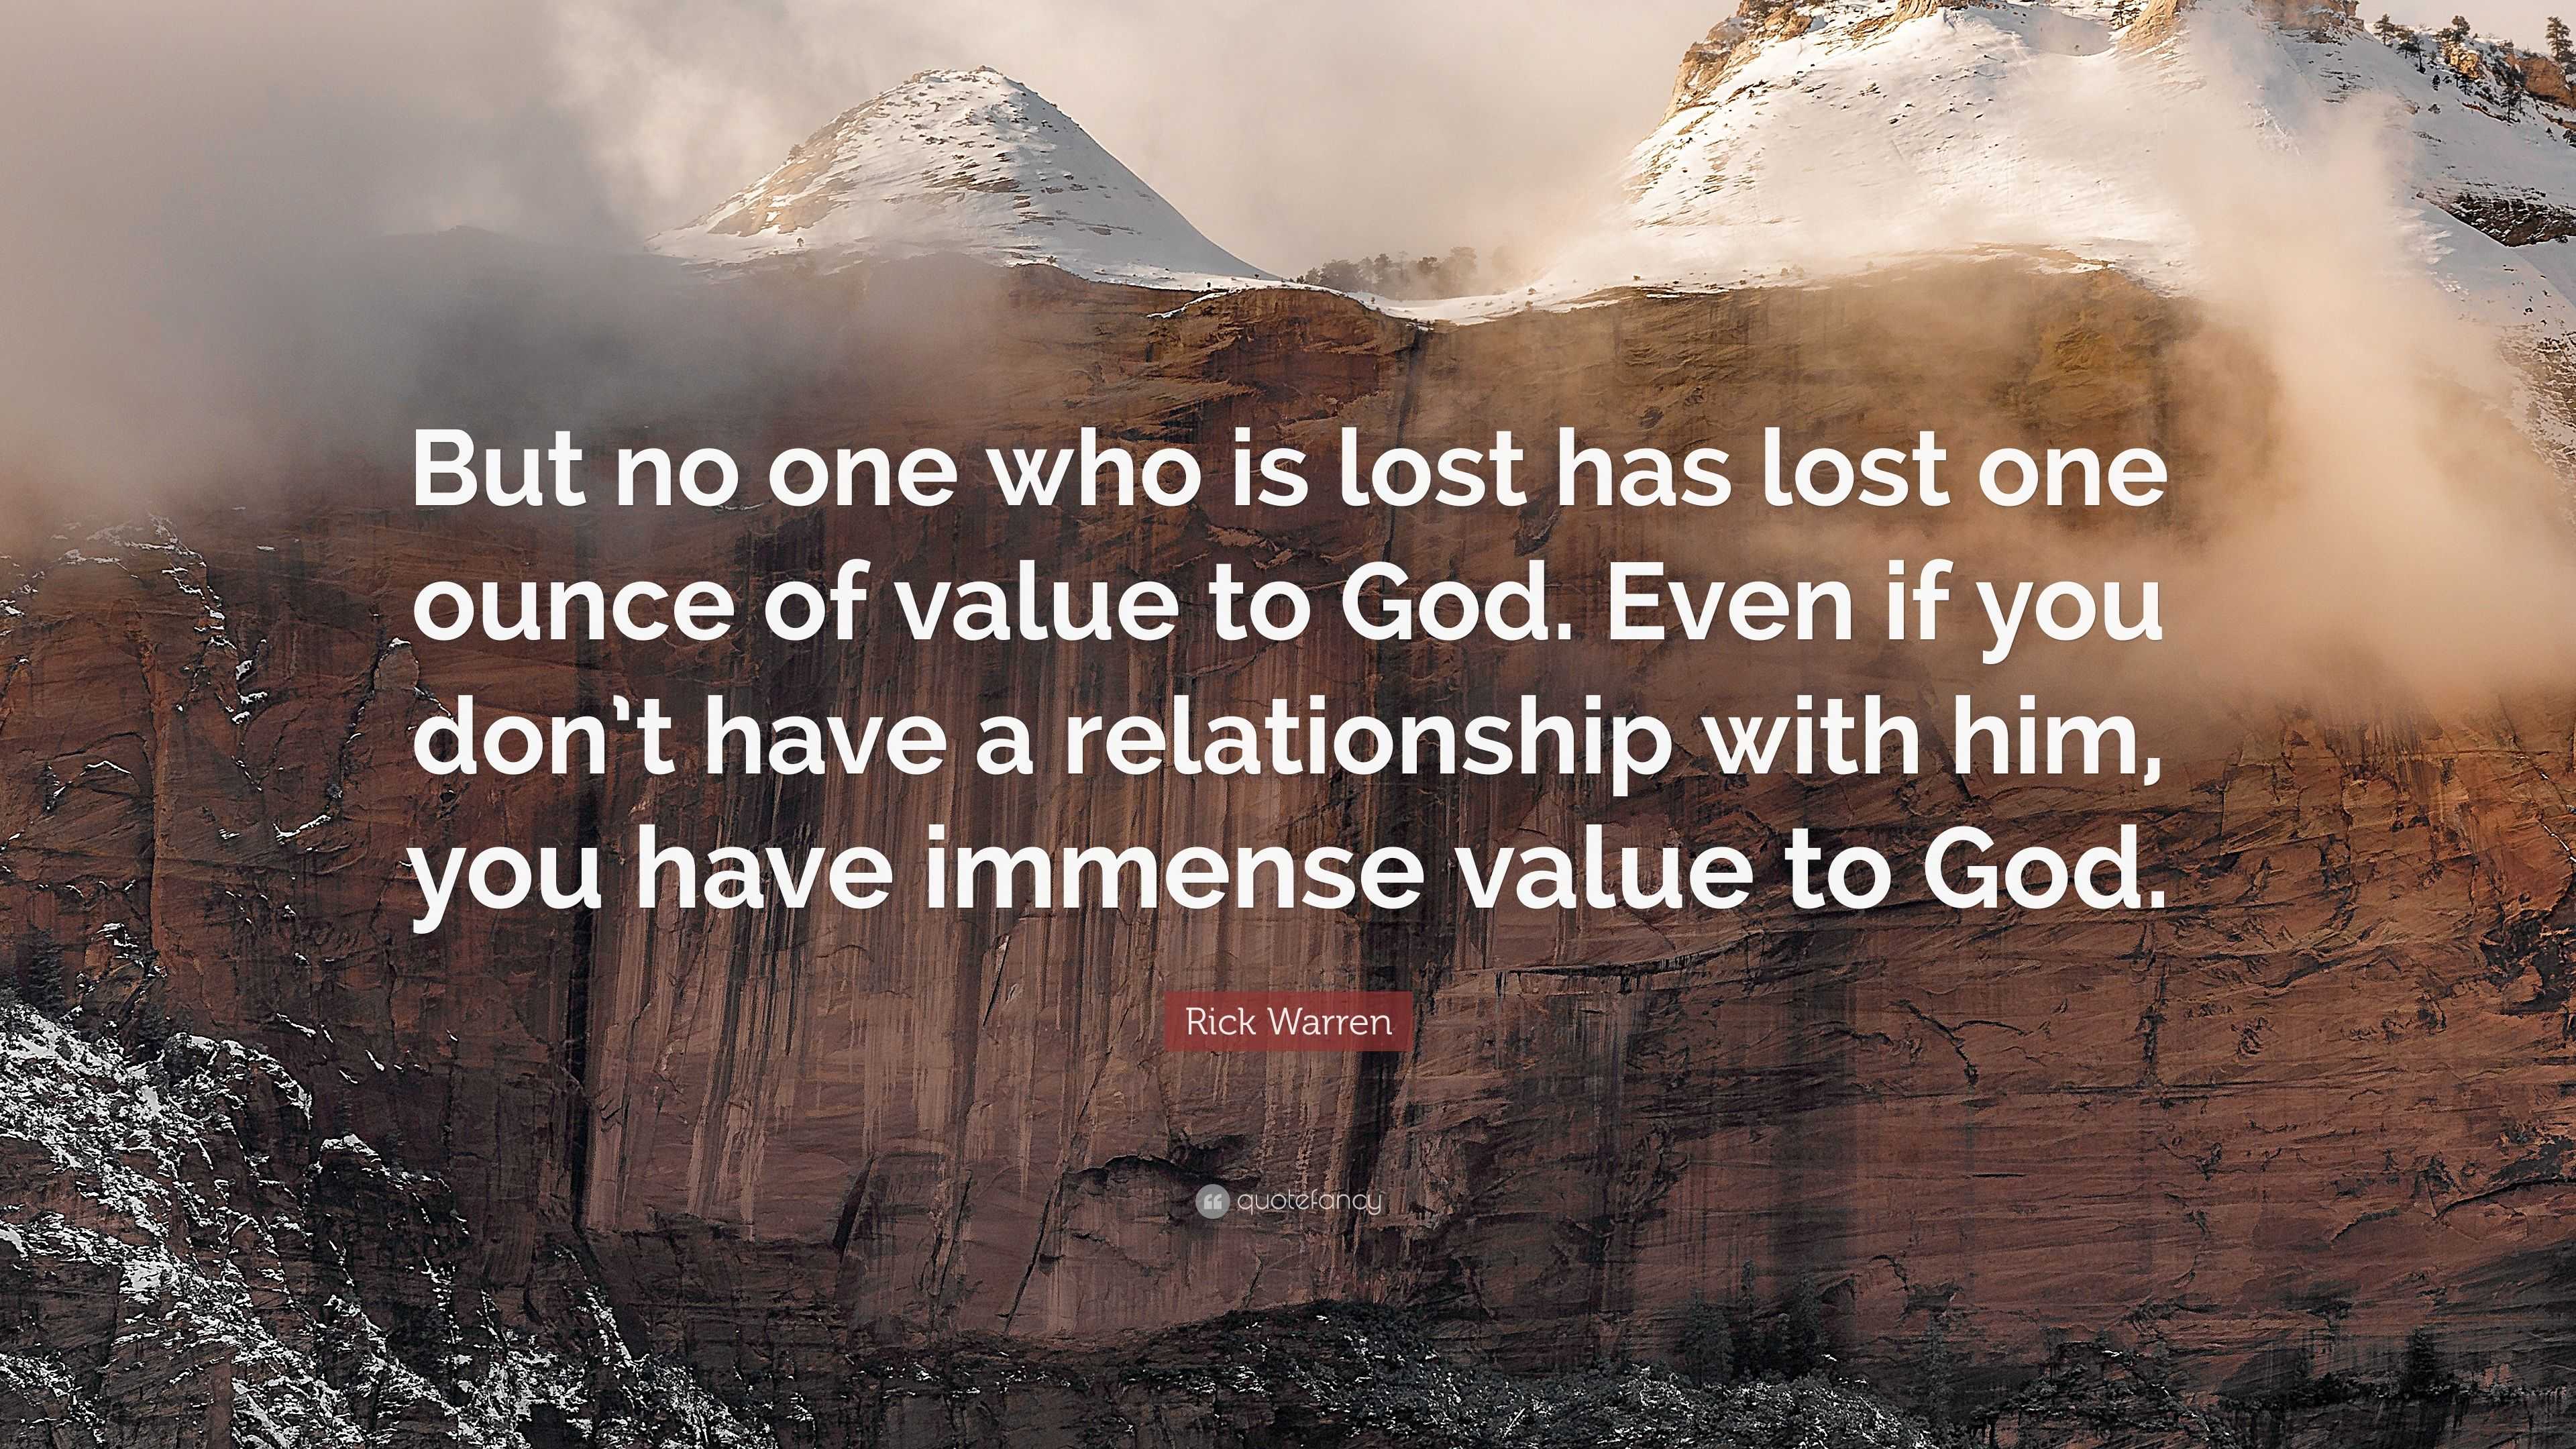 Rick Warren Quote “But no one who is lost has lost one ounce of